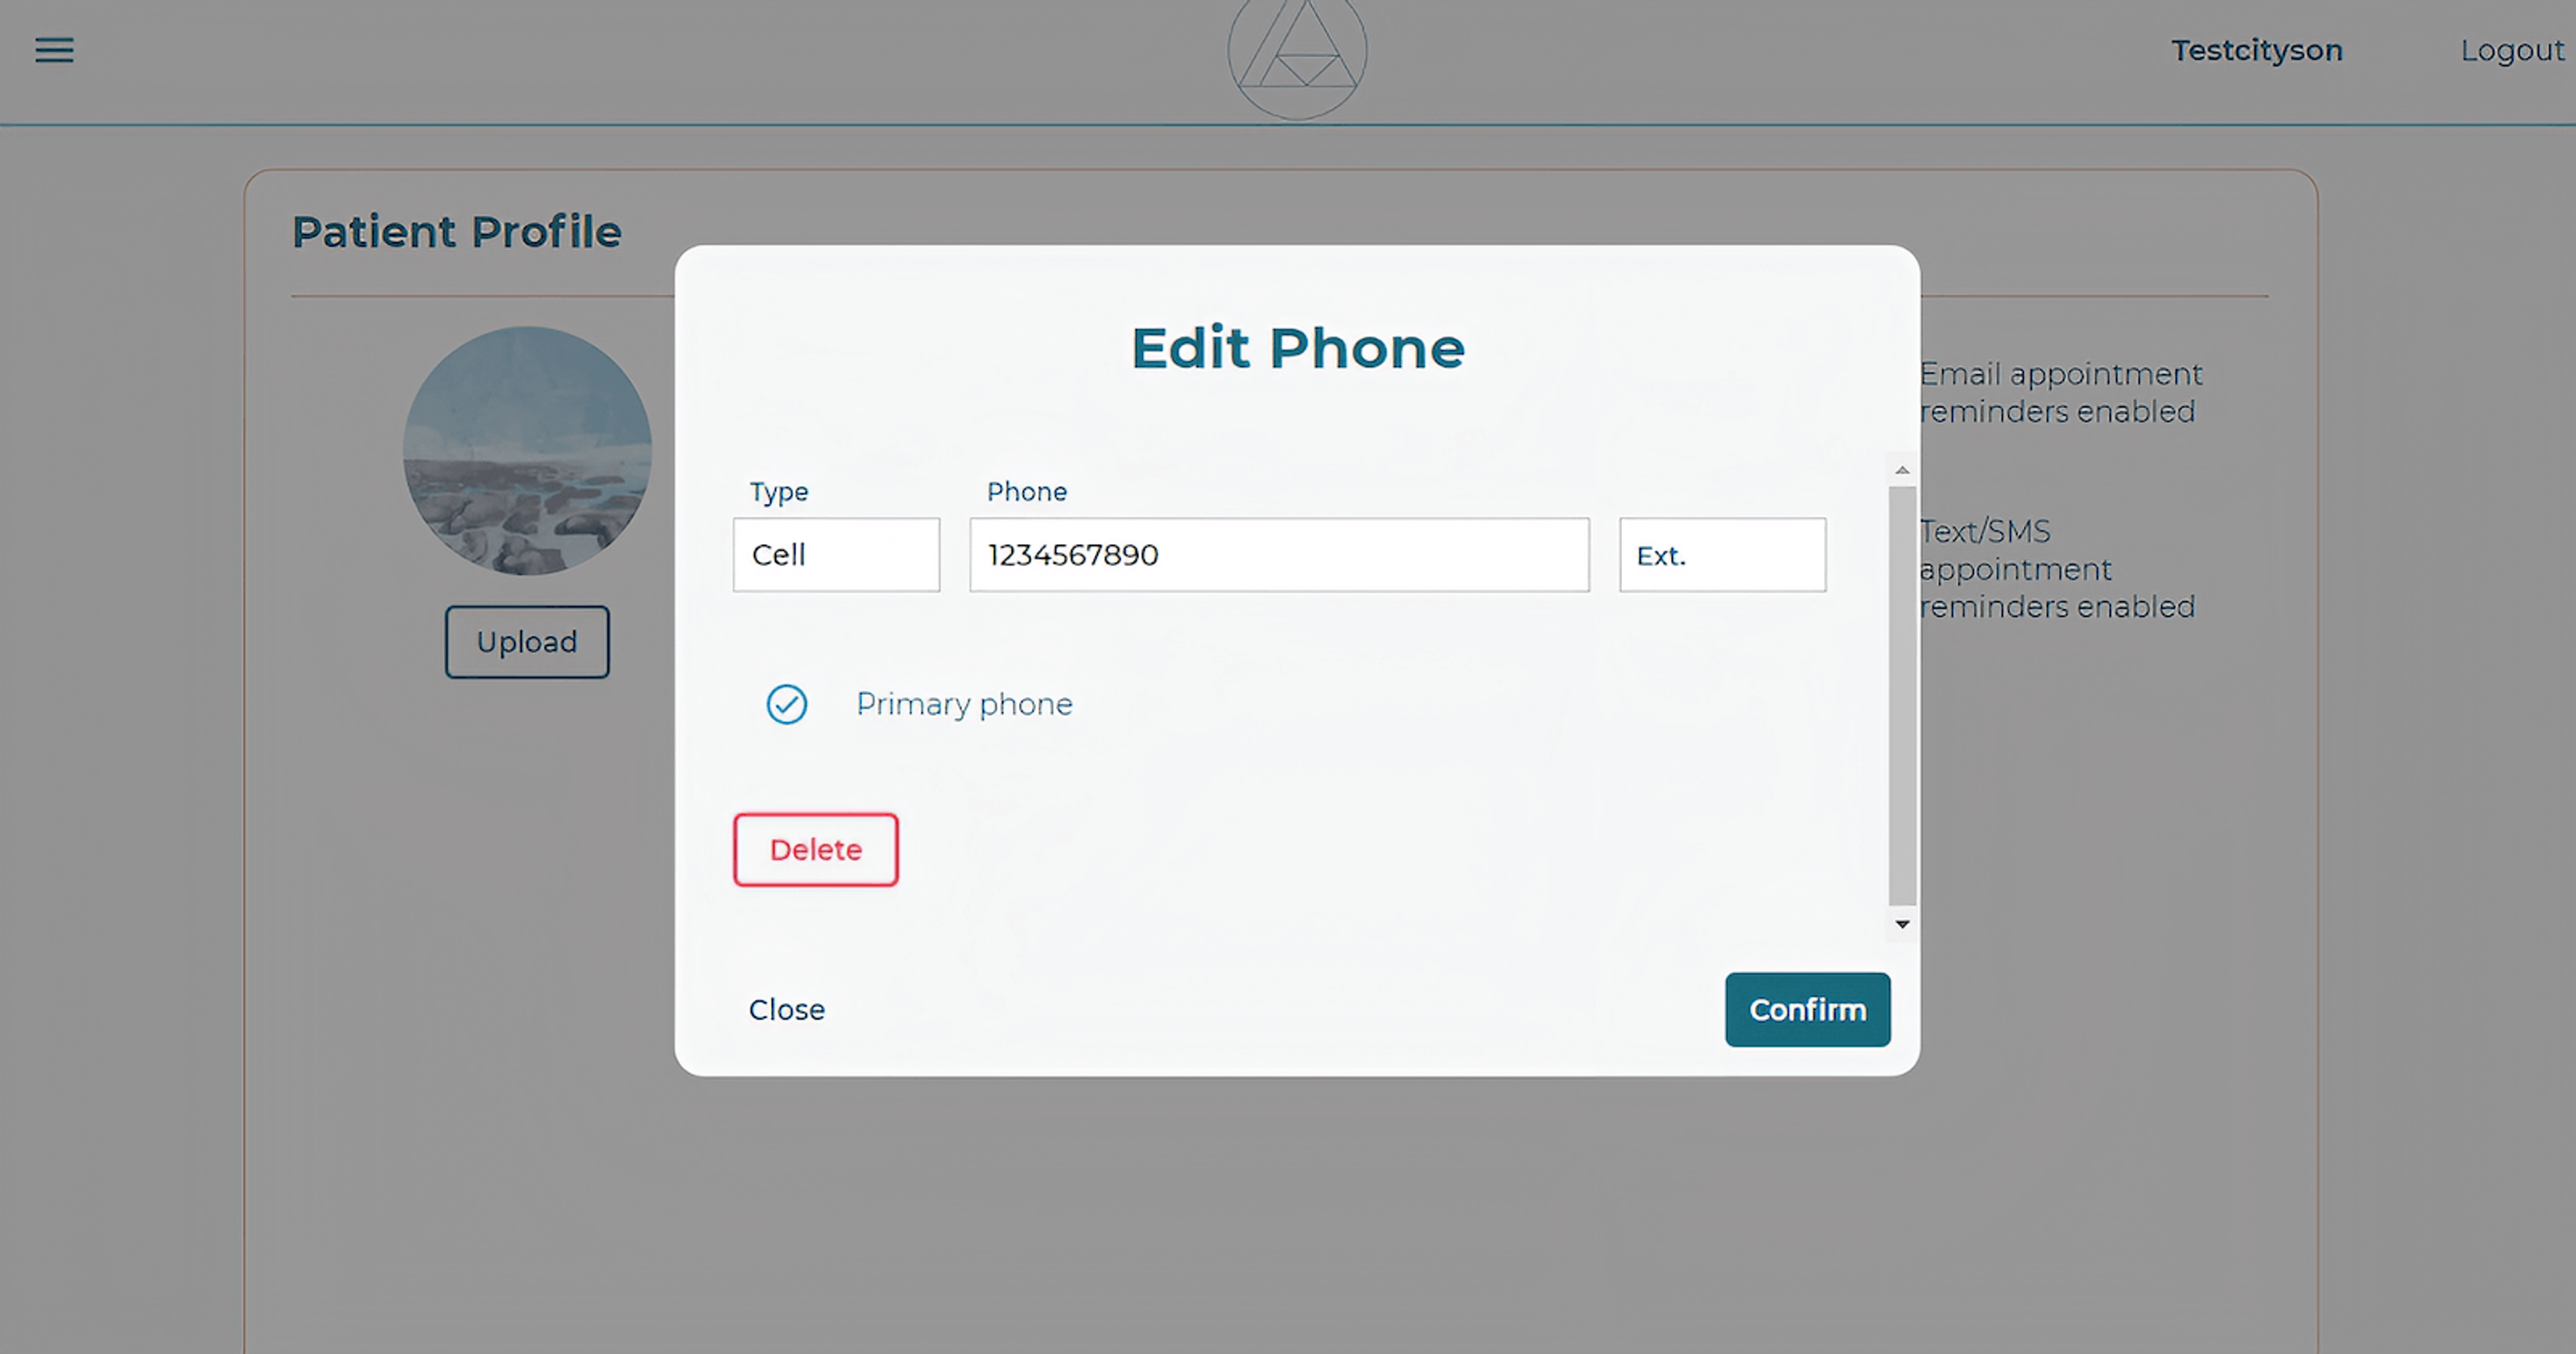 Edit Phone modal with form fields, and buttons for Delete, Close, and Confirm.